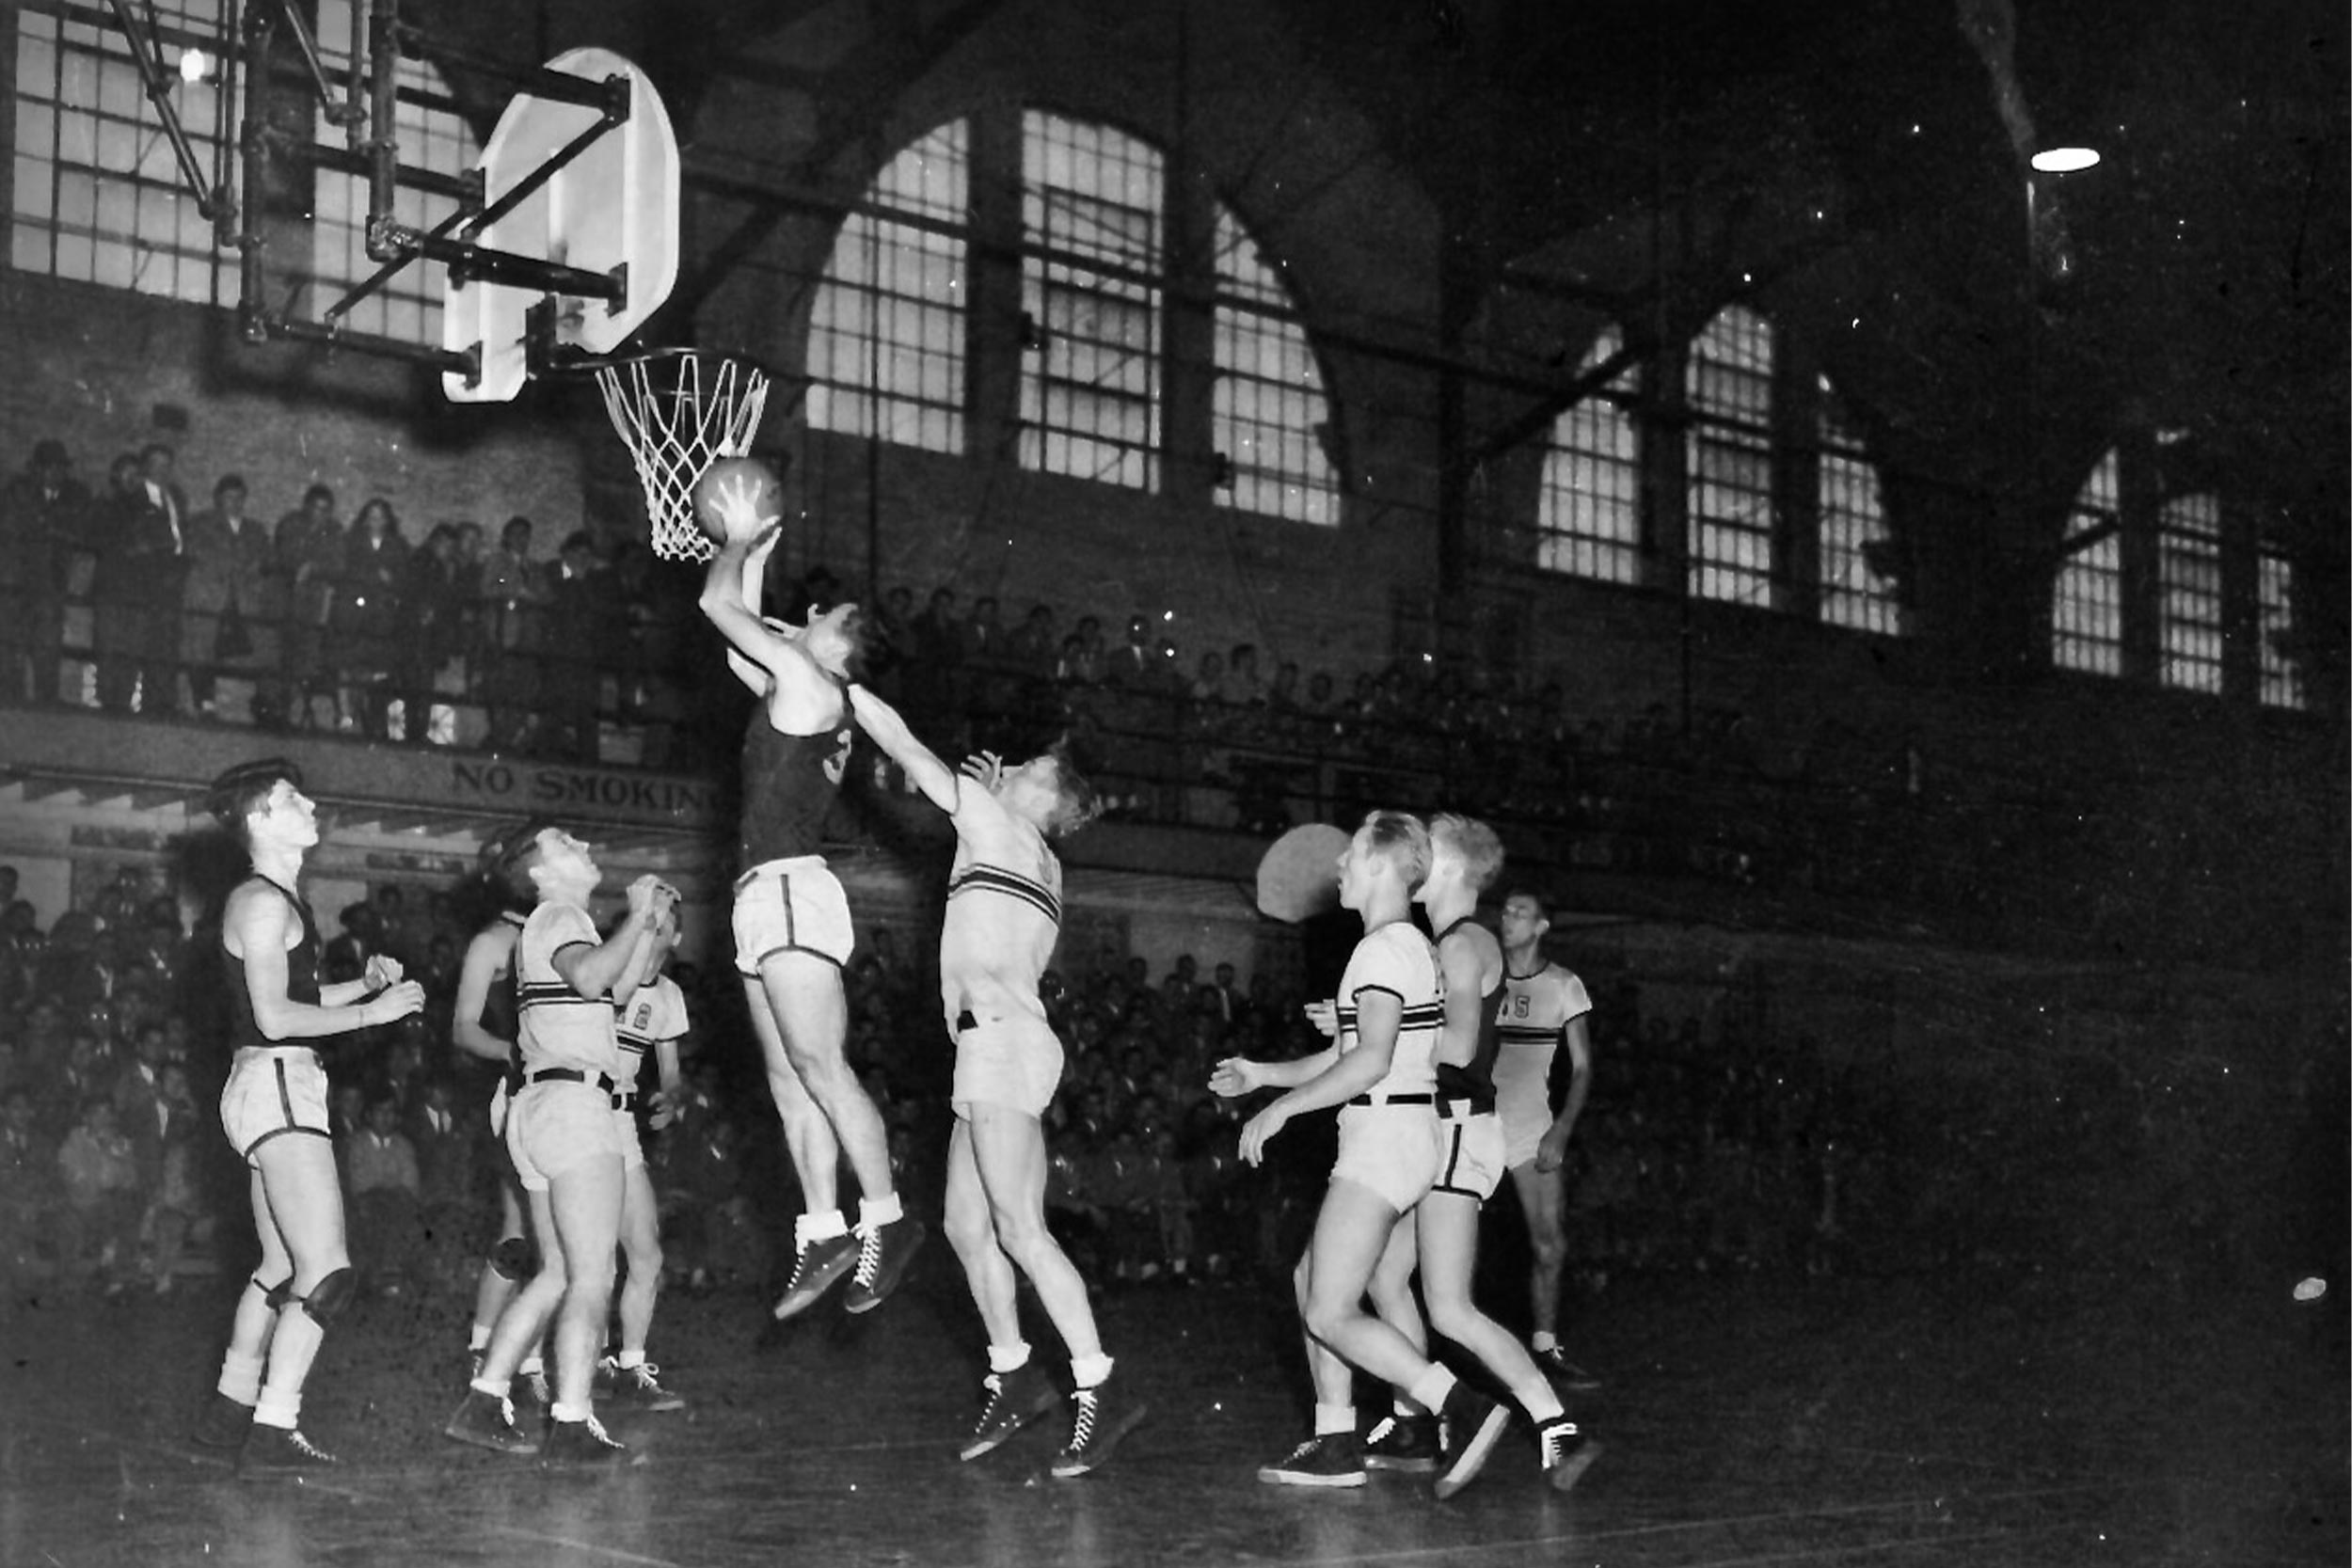 Old UVA mens basketball team playing during a game